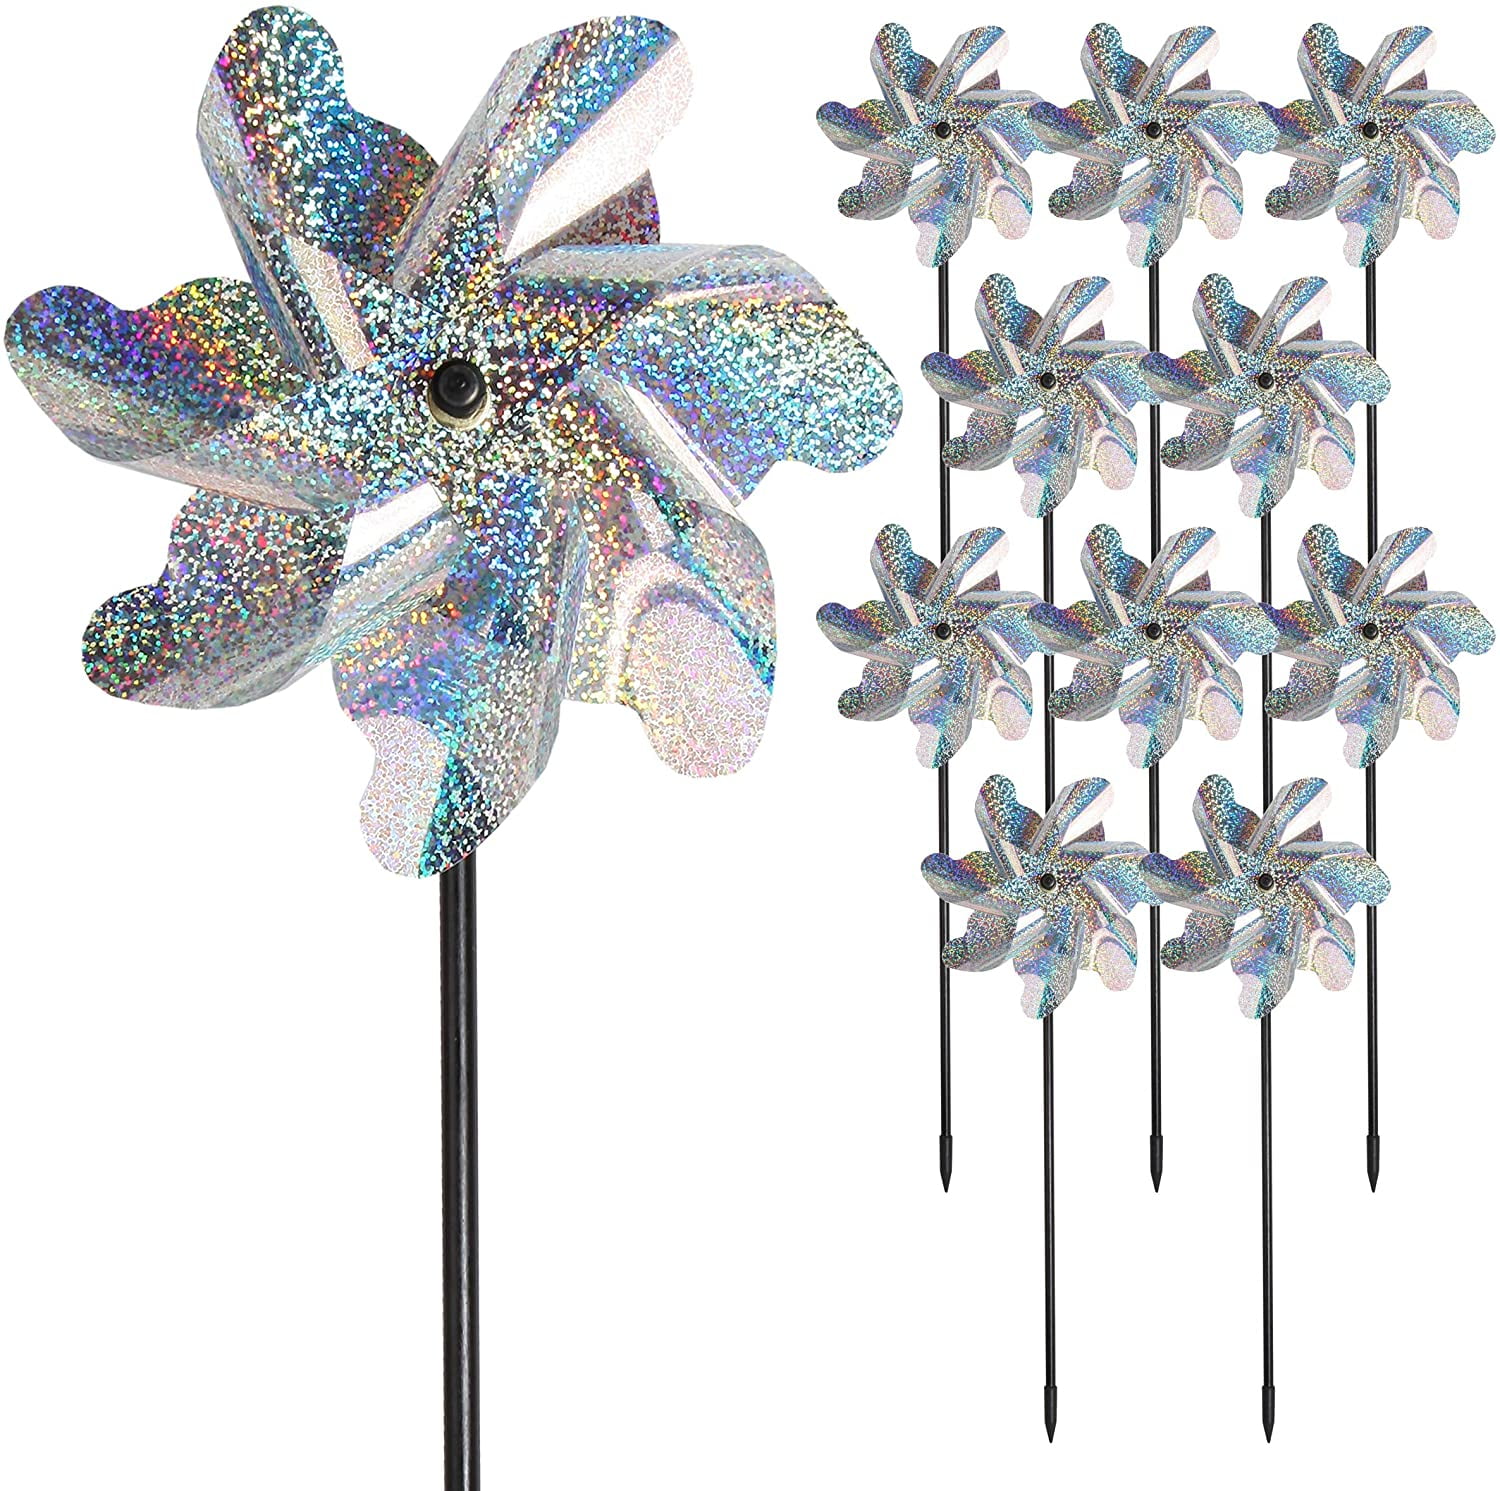 Bird Blinder Repellent PinWheels Set of 8 Sparkly Holographic Pin Wheel Spinners Scare Off Birds and Pests 